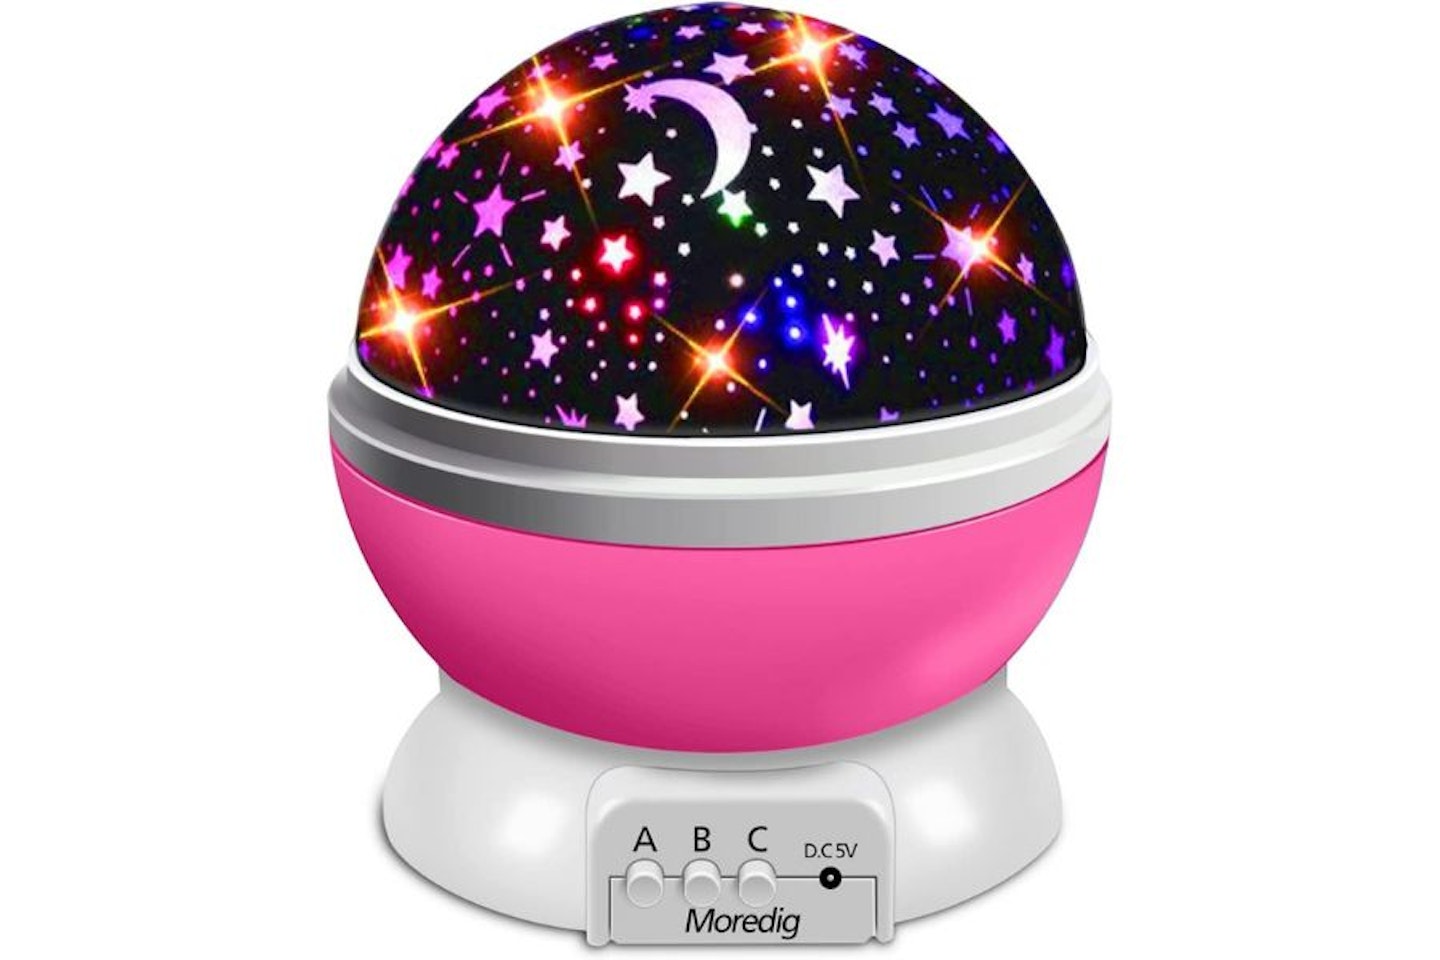 Space party ideas - Moredig Star Projector Night Light